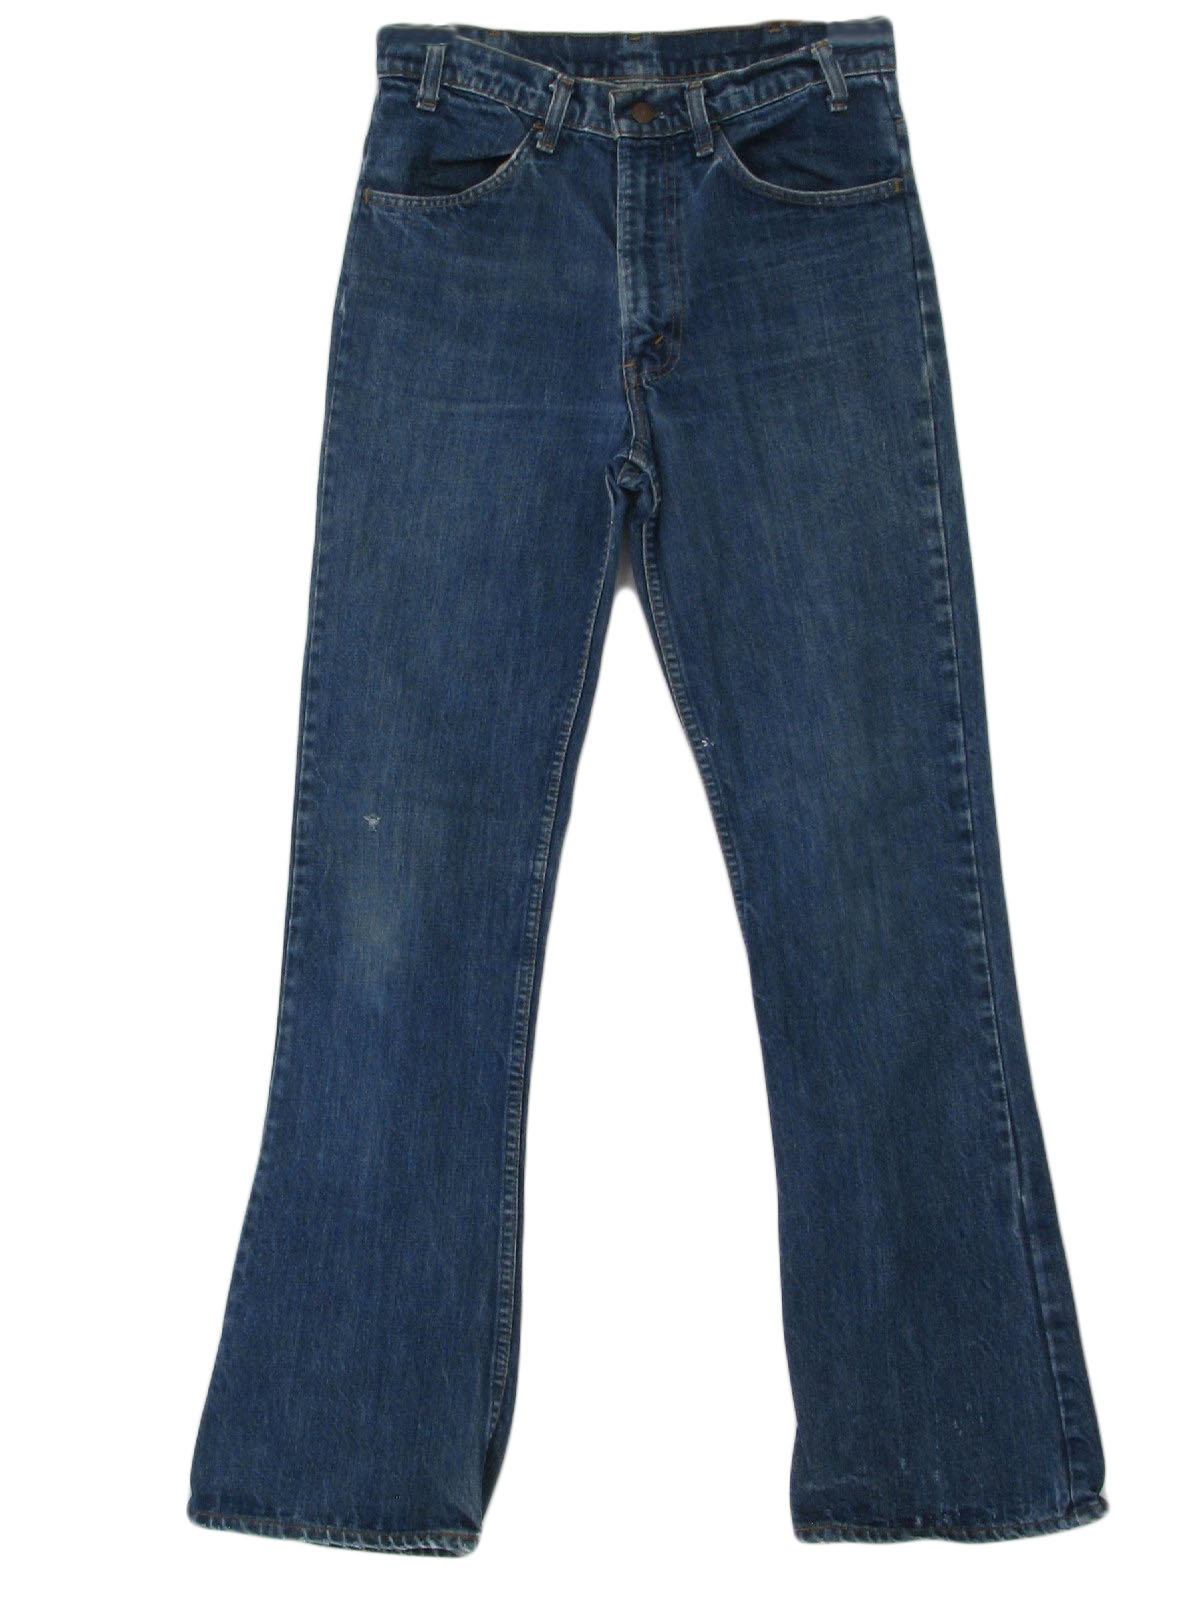 Retro 1960's Flared Pants / Flares (Levis) : Late 60s or early 70s ...